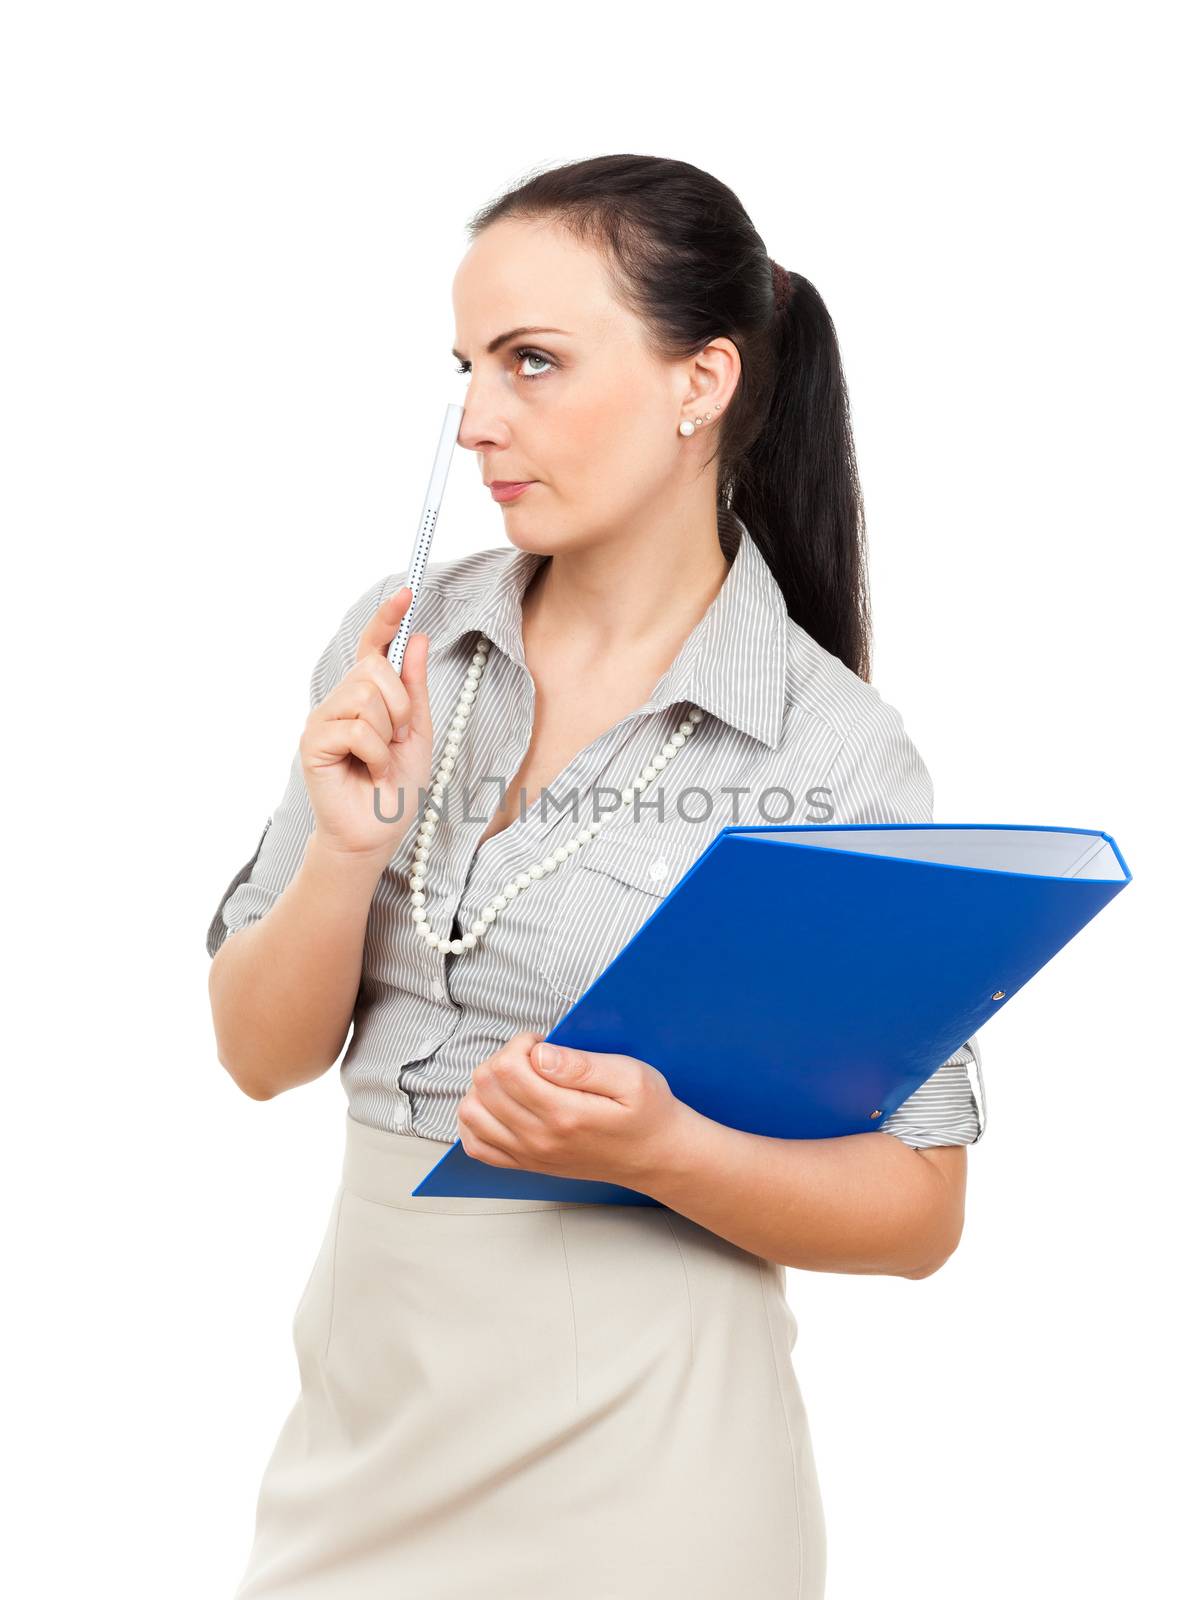 A business woman with a blue binder and a pencil